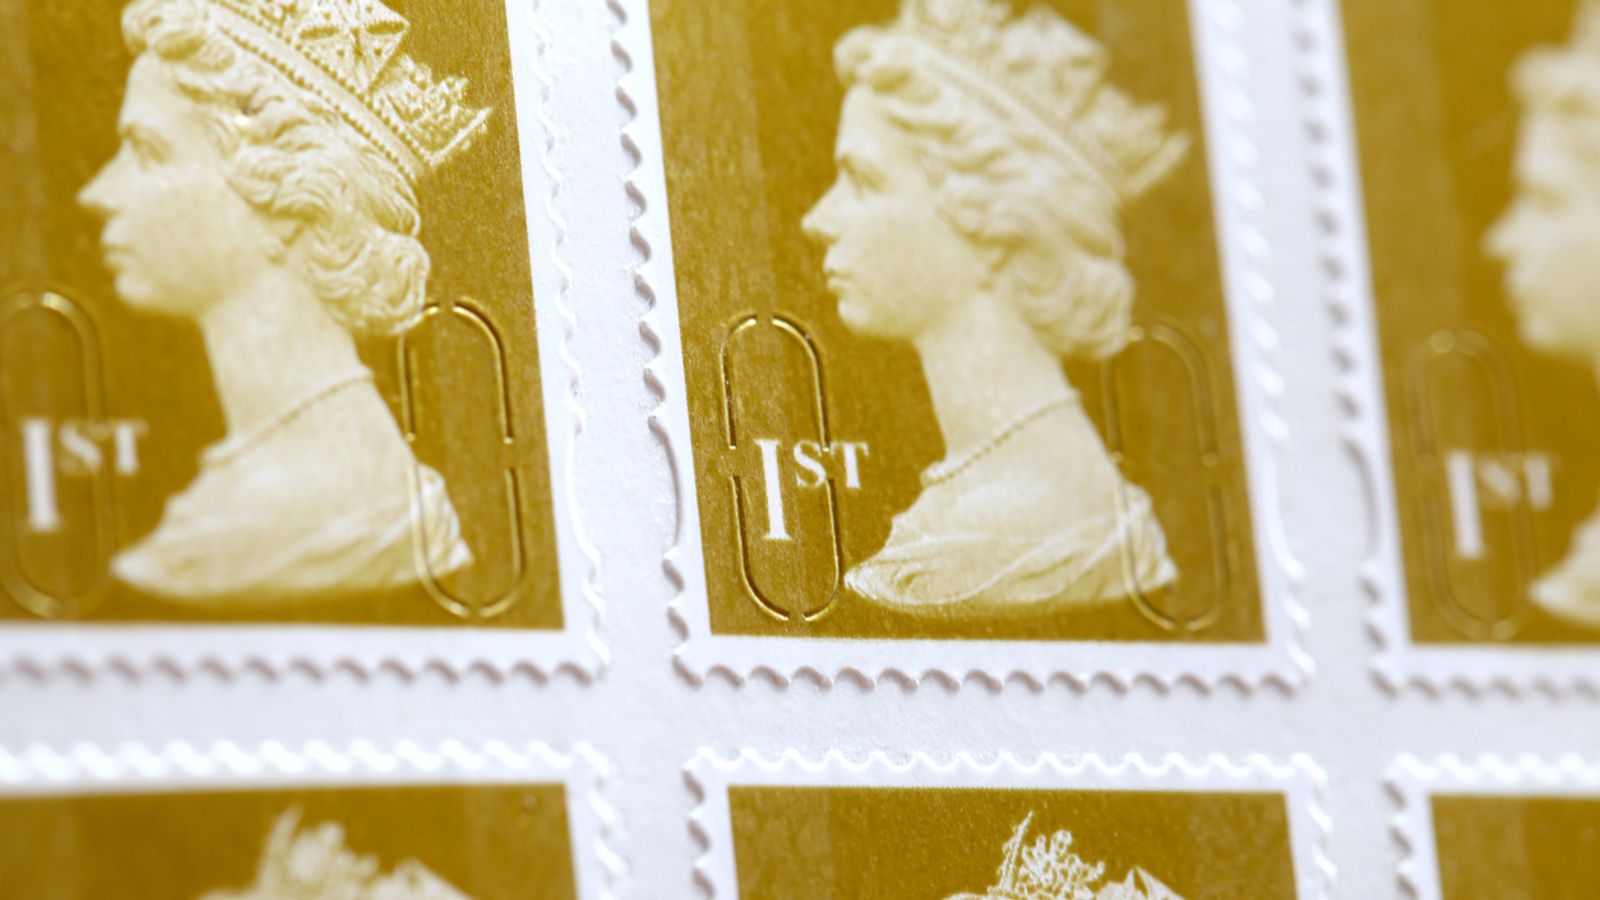 Final day to use Royal Mail stamps without barcode before surcharge fee applies